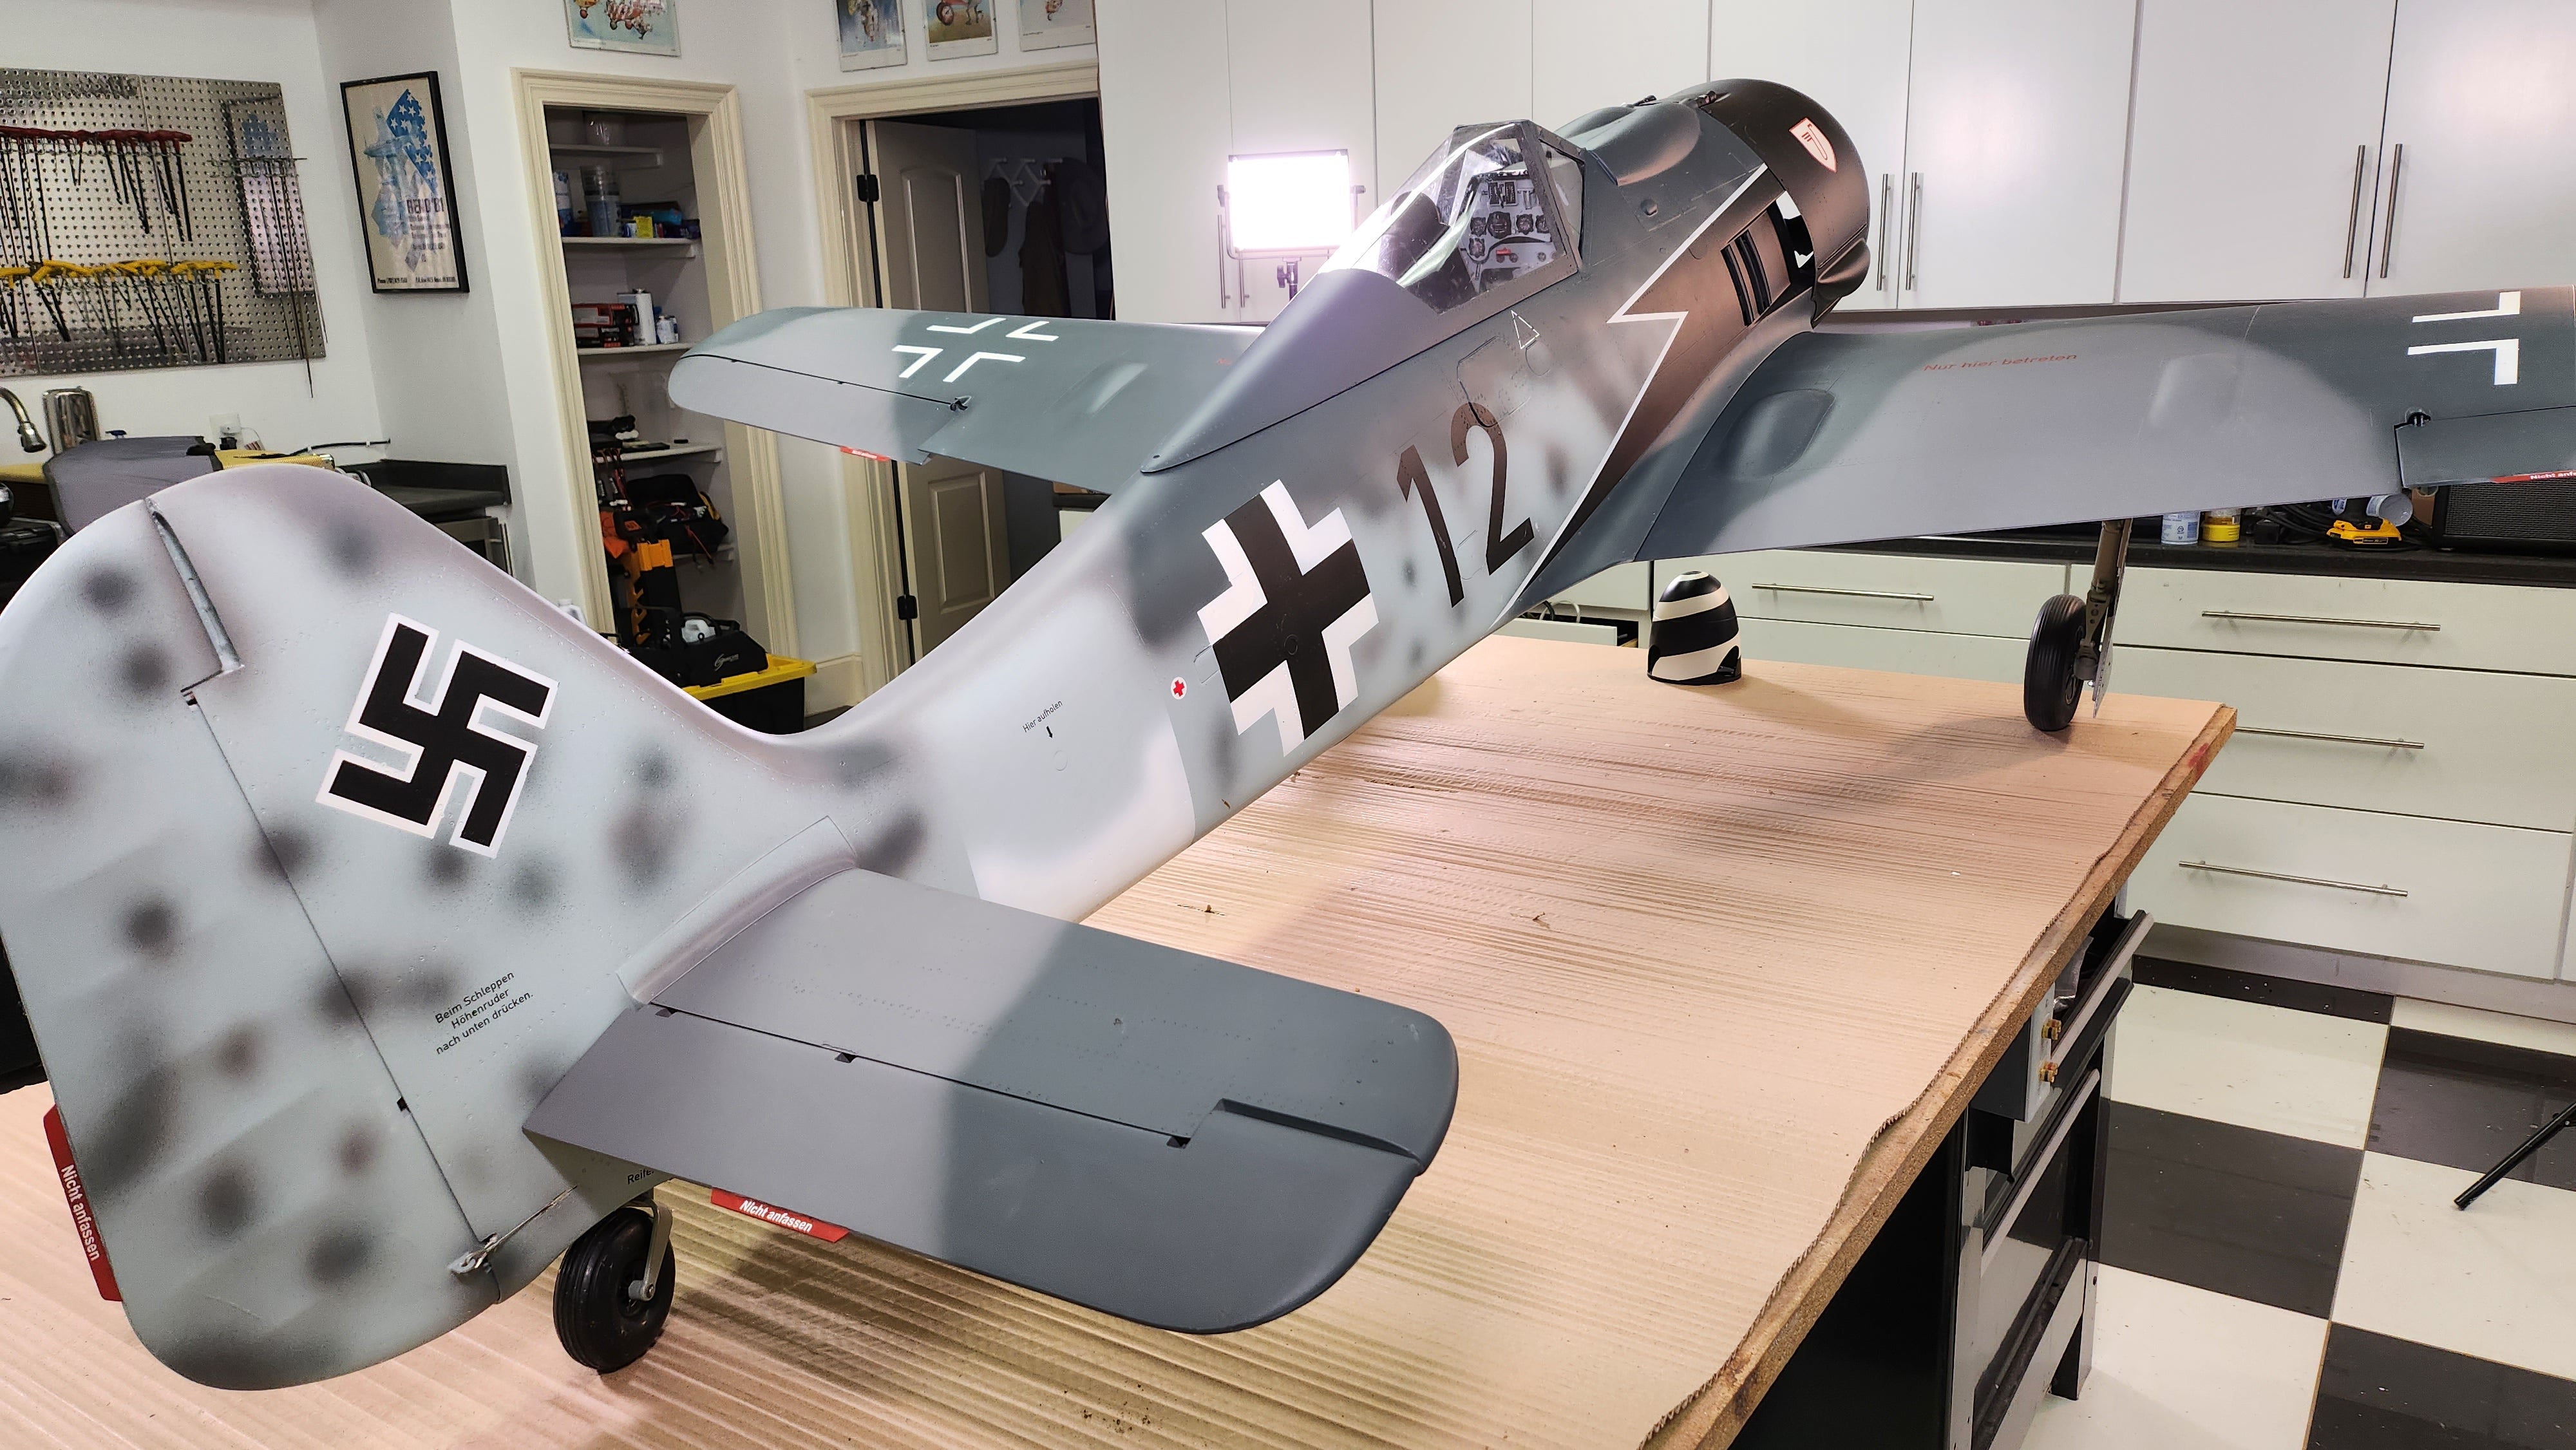 Airworld Focke Wulf FW-190A 2.84m 1:3.7 scale, ready for engine and maiden